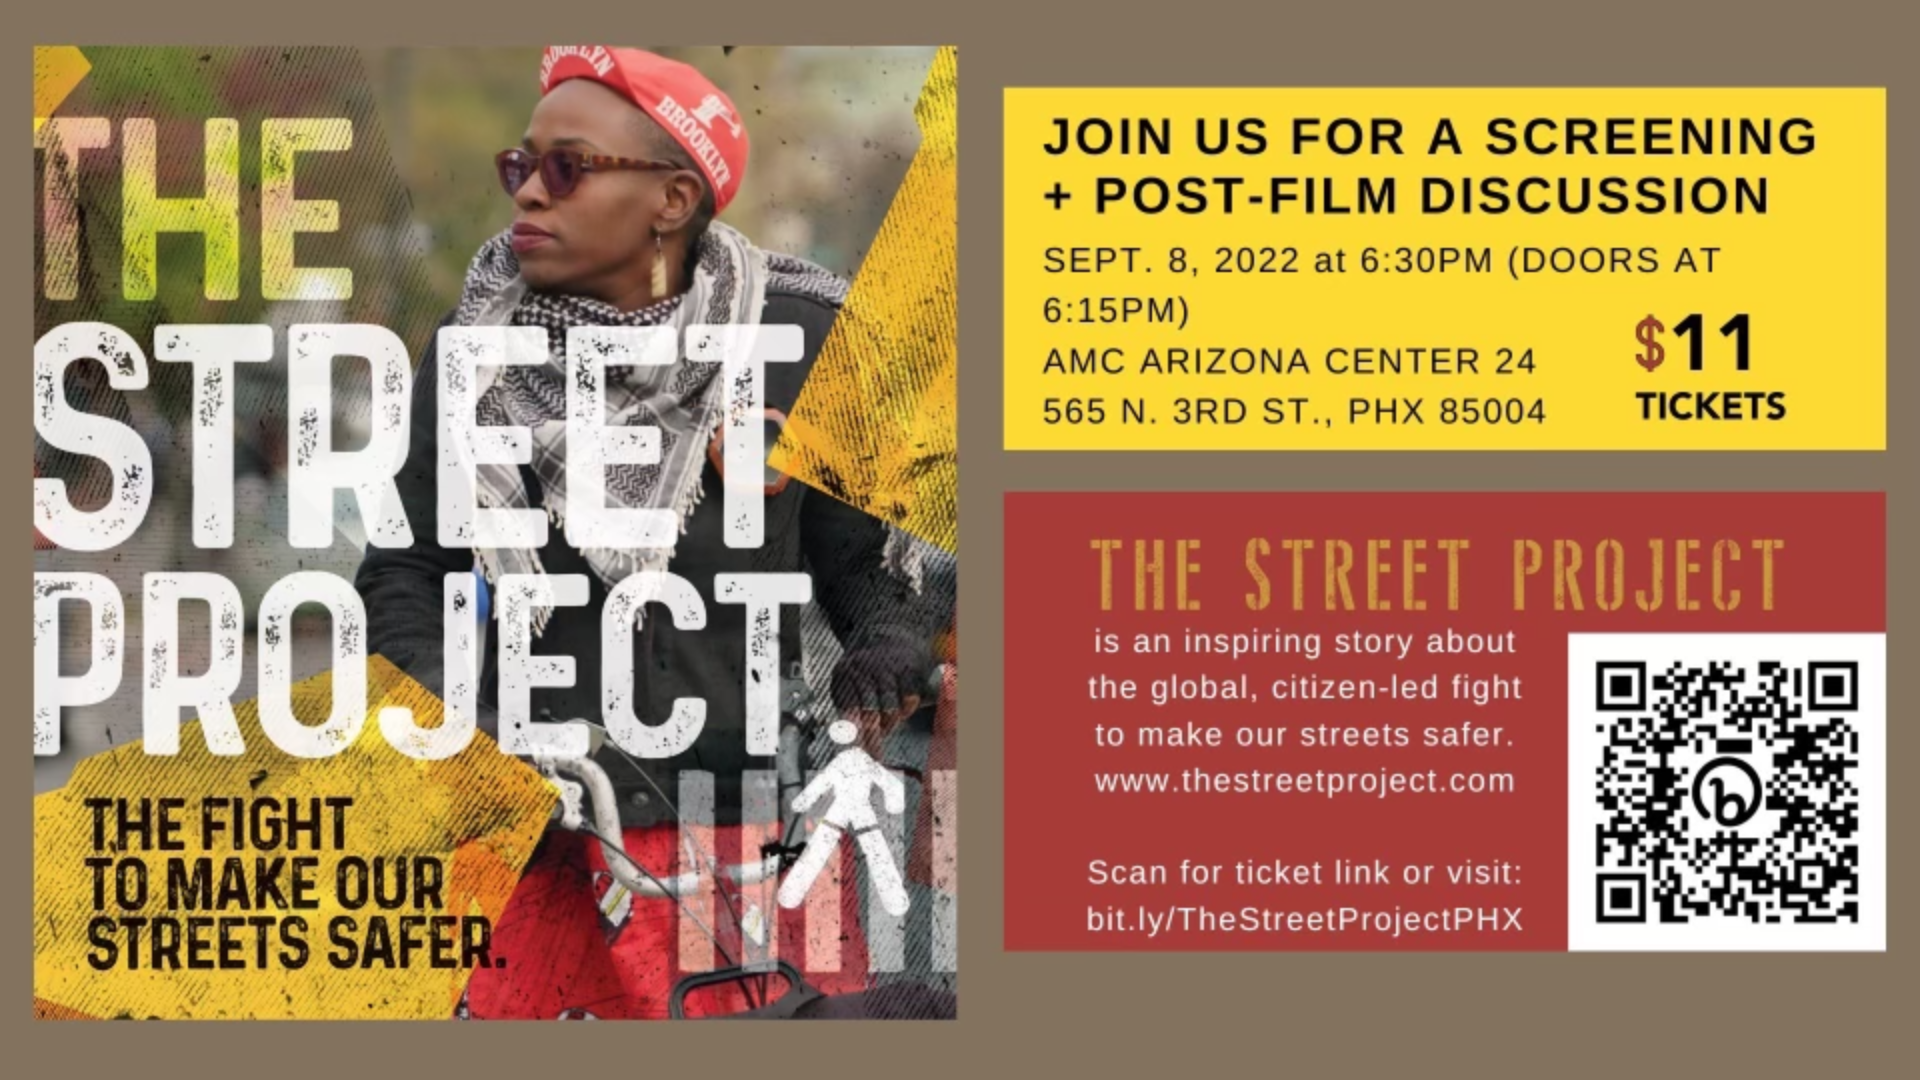 A movie poster for "The Street Project" with information about a screening.